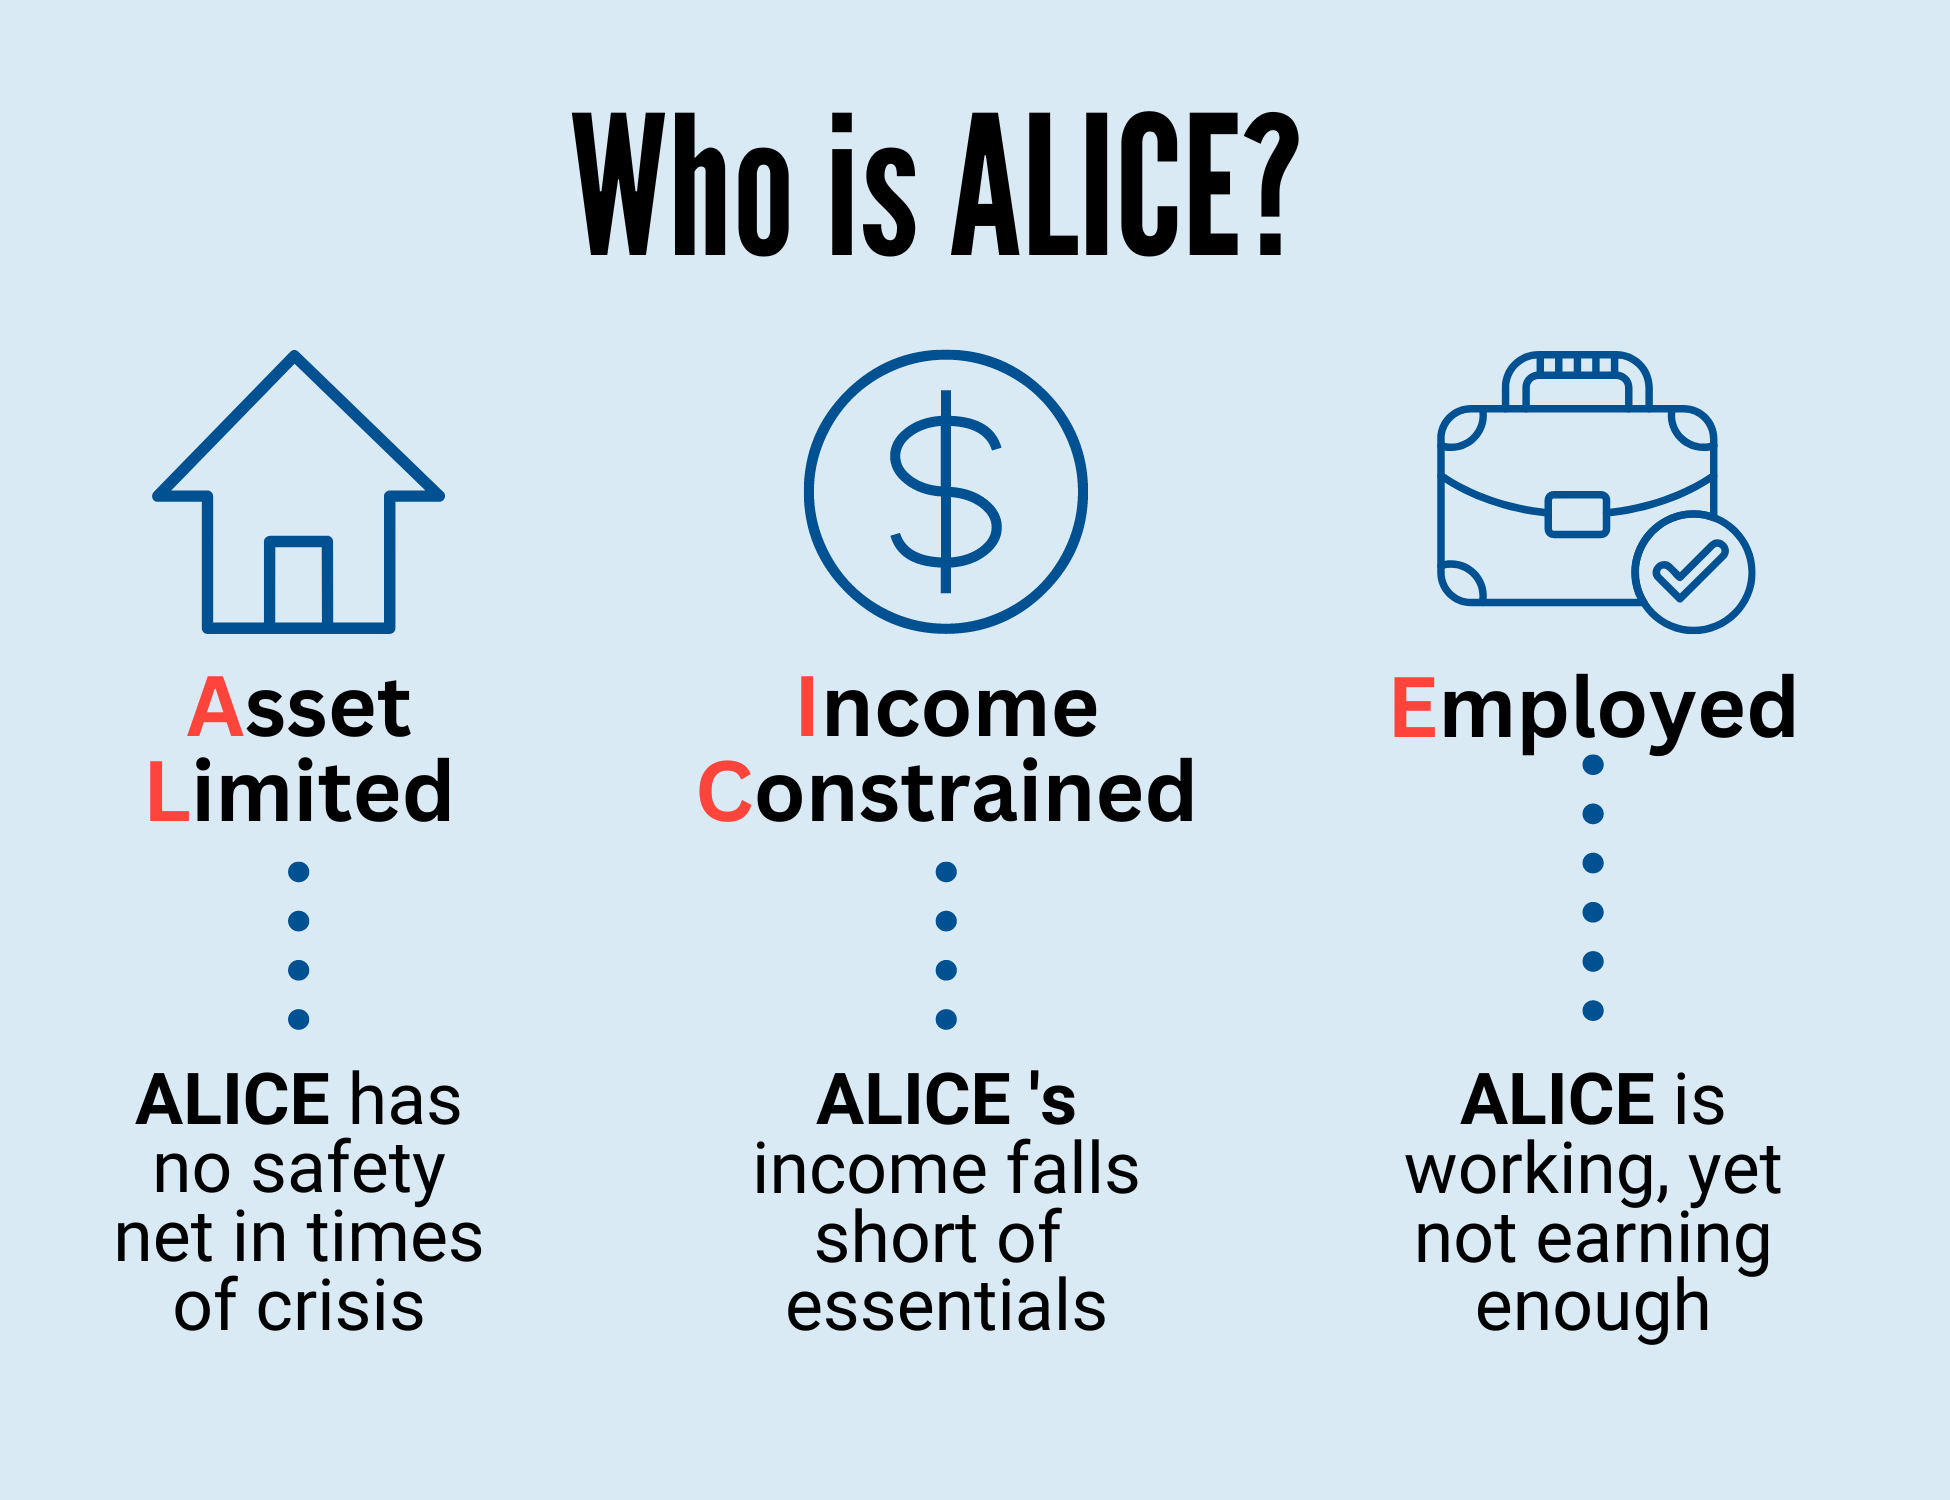 ALICE- Asset Limited, Income Constrained, Employed